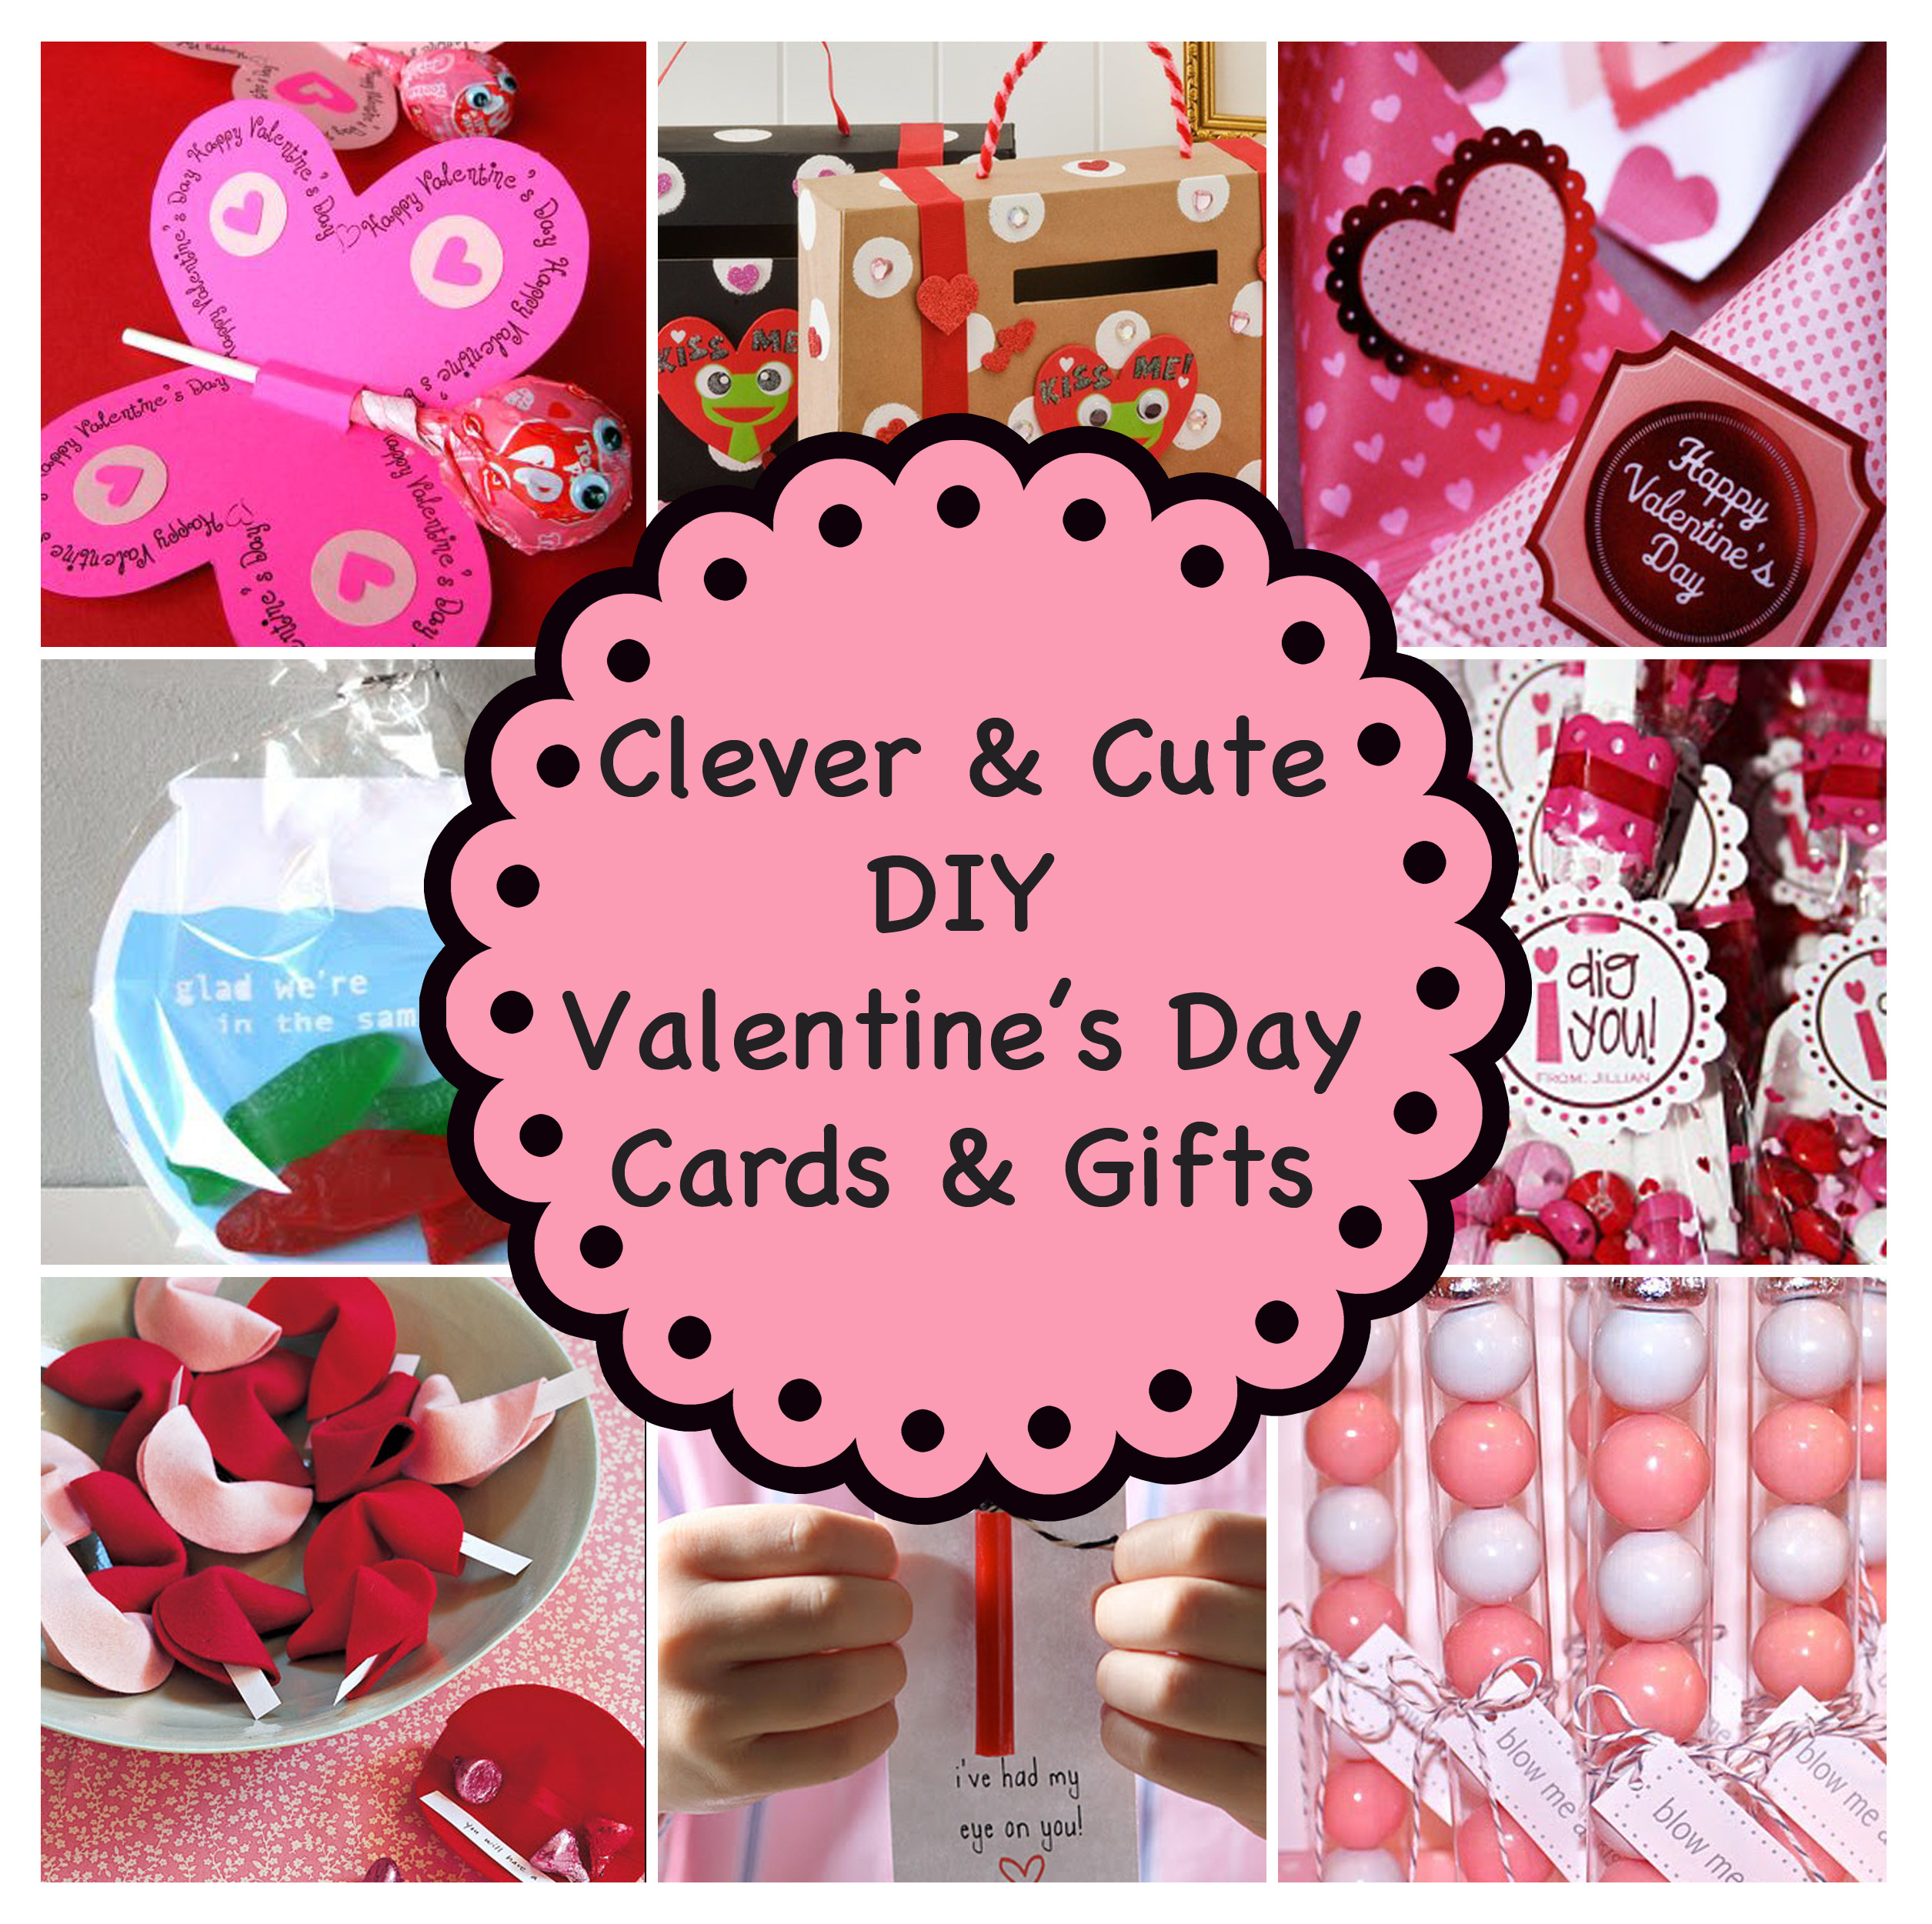 Ideas For Valentines Day Gift
 Clever and Cute DIY Valentine’s Day Cards & Gifts